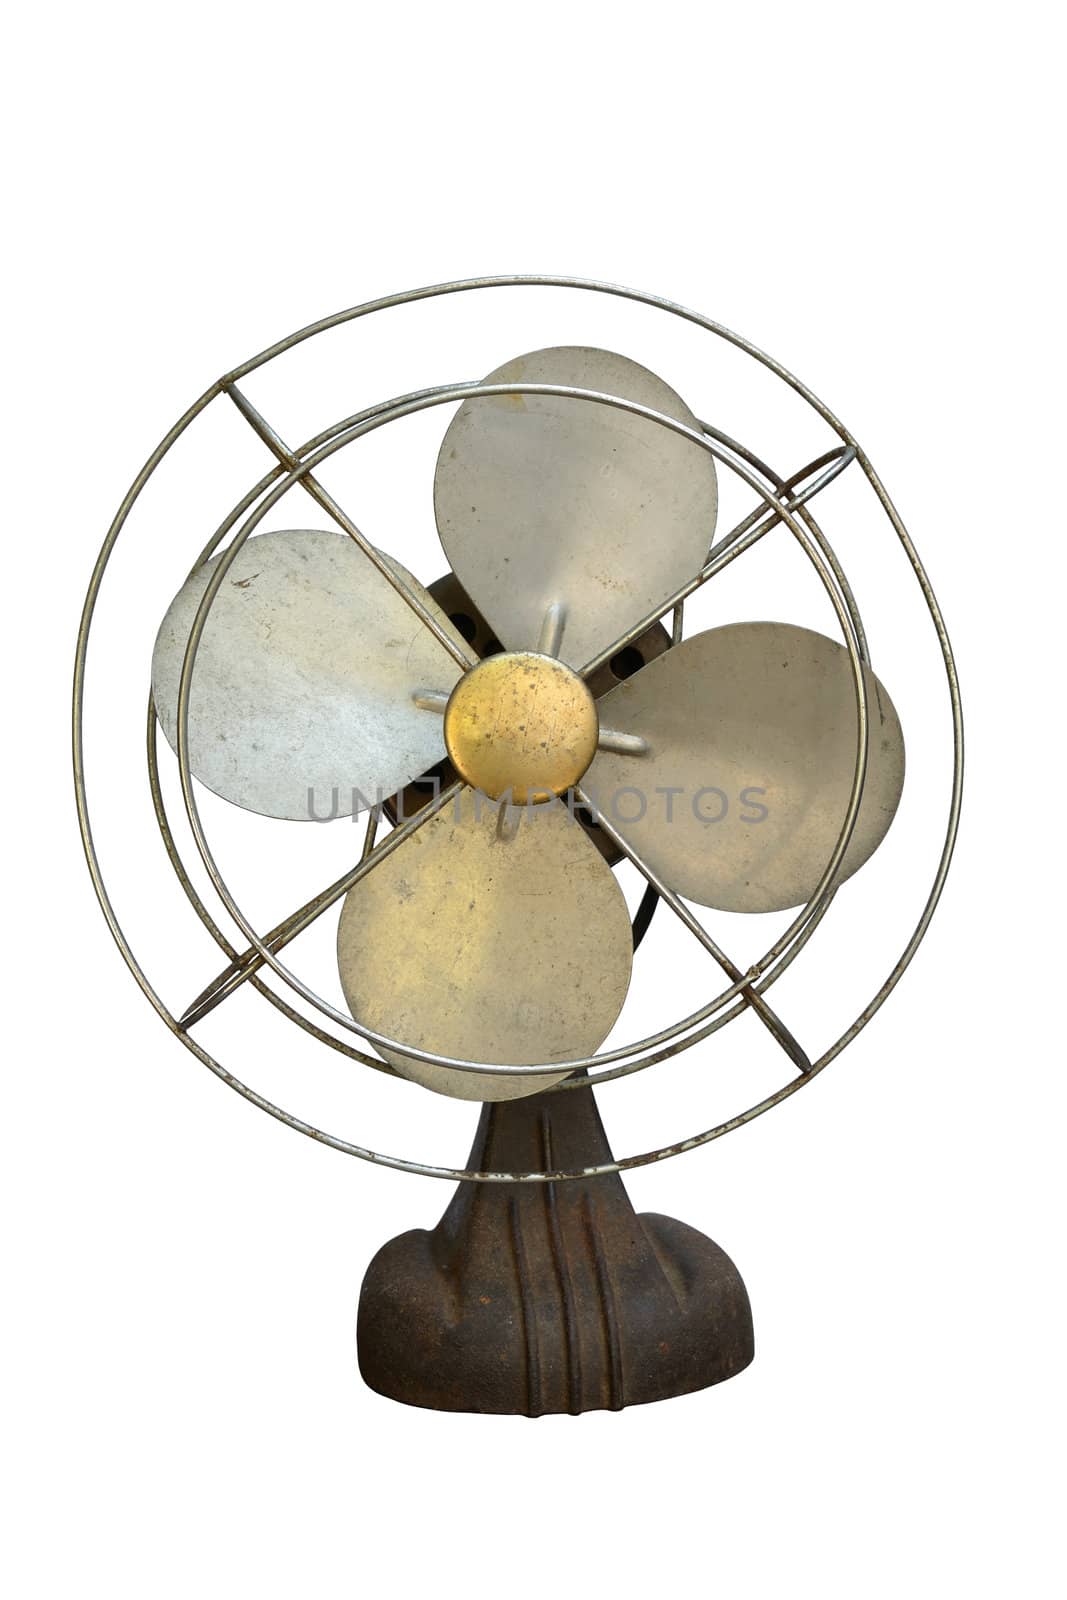 isolated vintage electric fan on white background with clipping path.